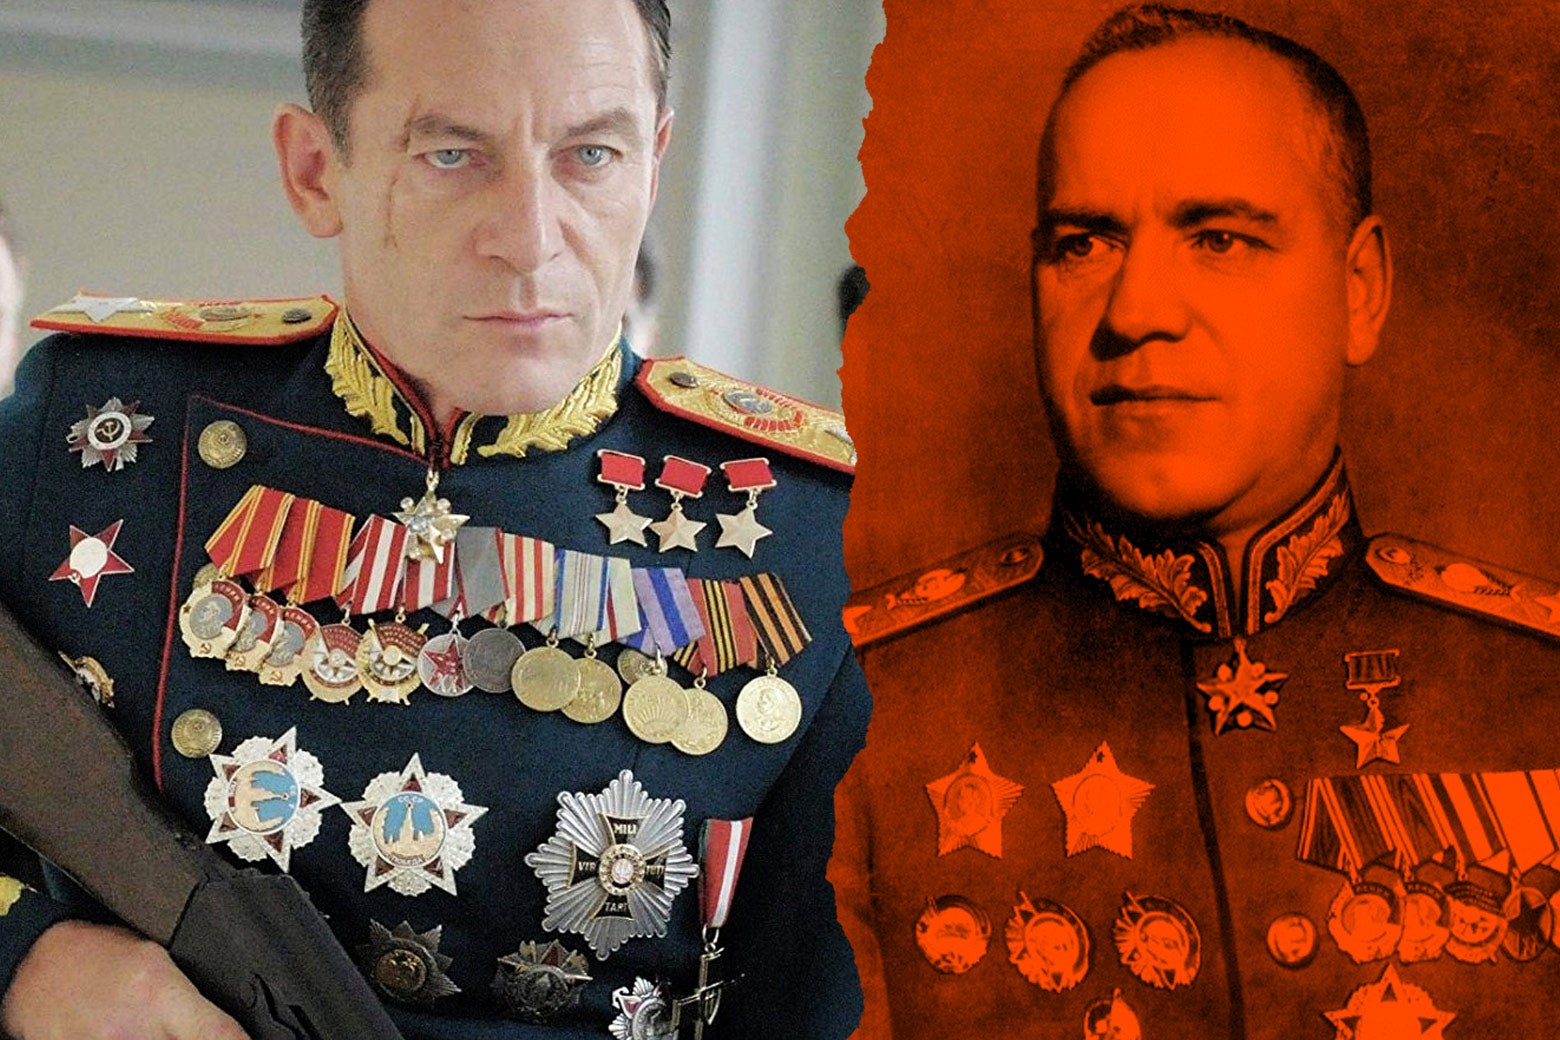 At left: Jason Isaacs as Georgy Zhukov in the film. At right: the real Georgy Zhukov.